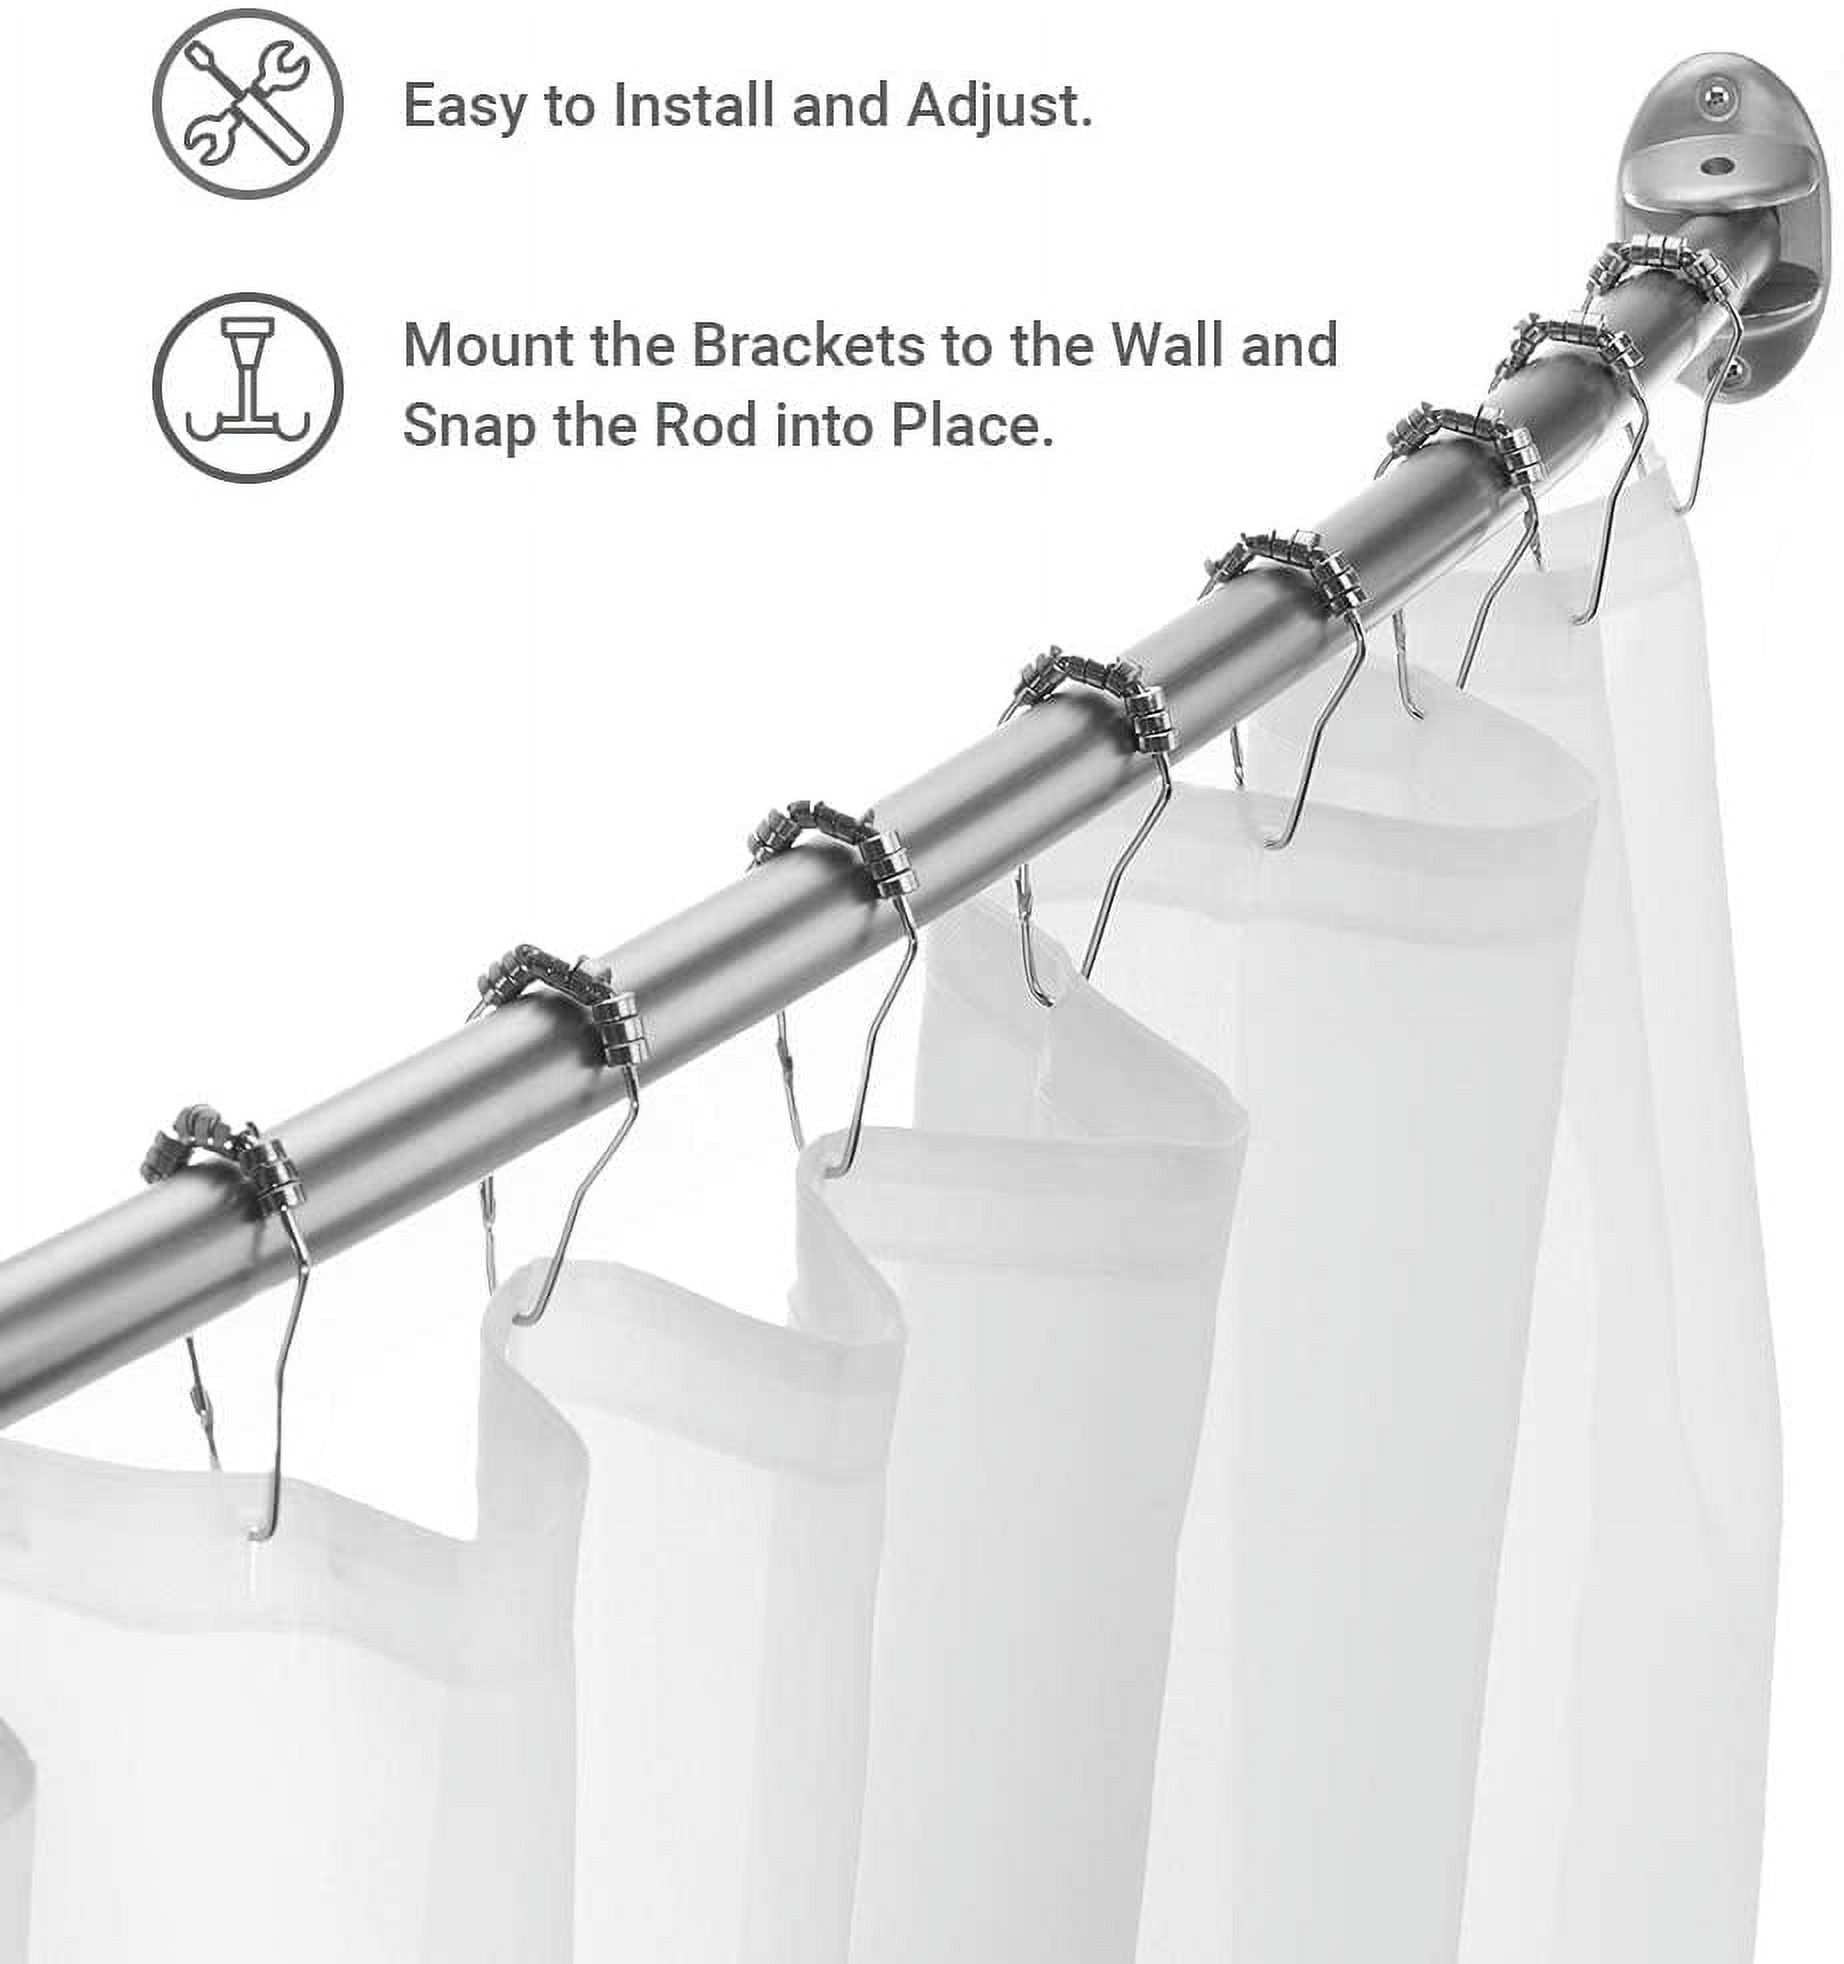 Excell 42 in Adjustable Curved Shower Curtain Rod, Nickel - image 2 of 5